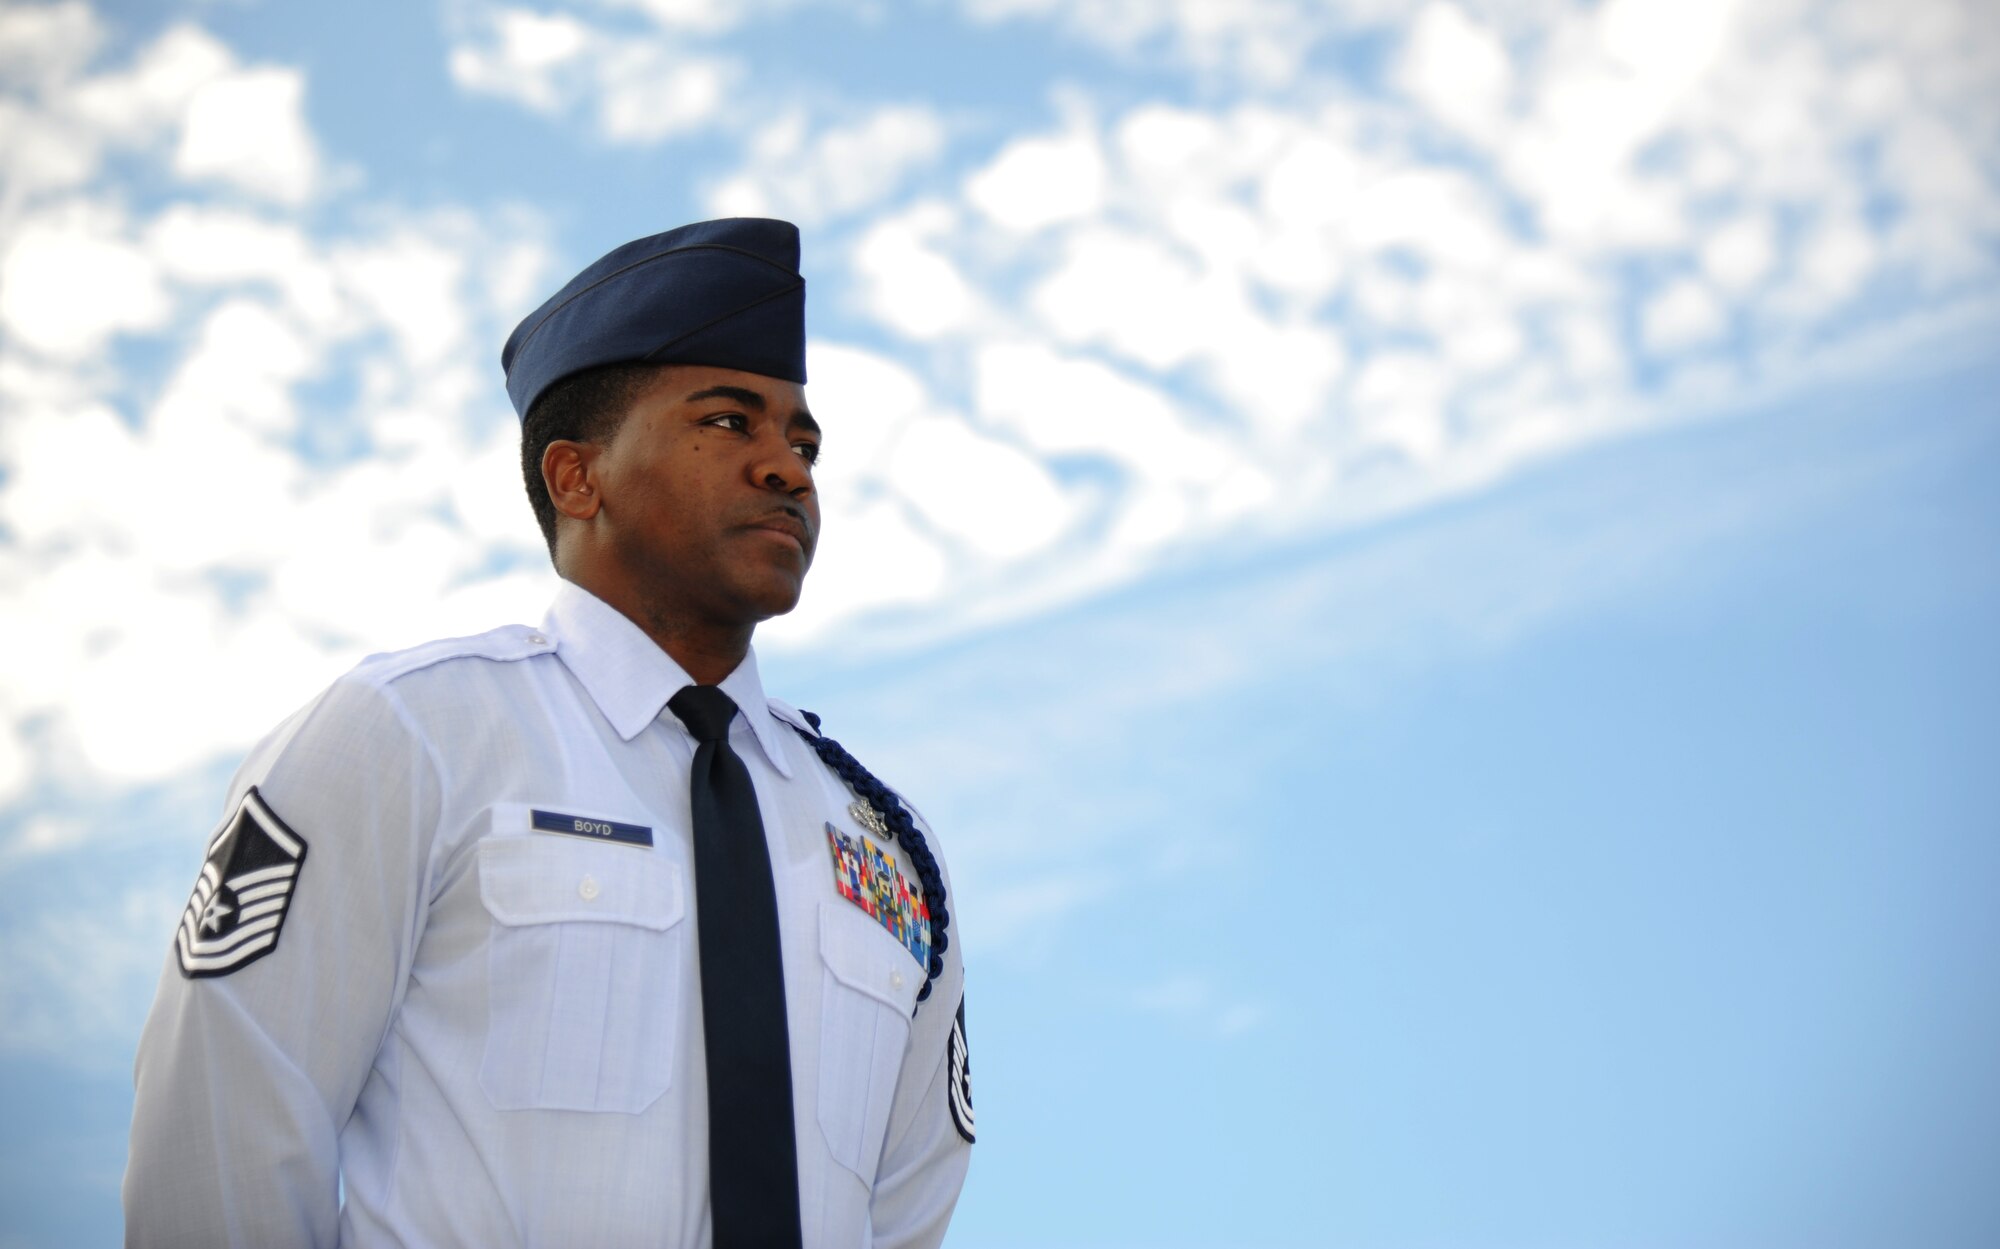 Master Sgt. Terrance Boyd, 334th Training Squadron flight chief military training flight, stands at attention Nov. 18, 2013, at Avery Manor, Keesler Air Force Base, Miss.  Boyd was recently selected as the 2013 Air Education and Training Command junior enlisted category Lance P. Sijan award winner.  (U.S. Air Force photo by Kemberly Groue)